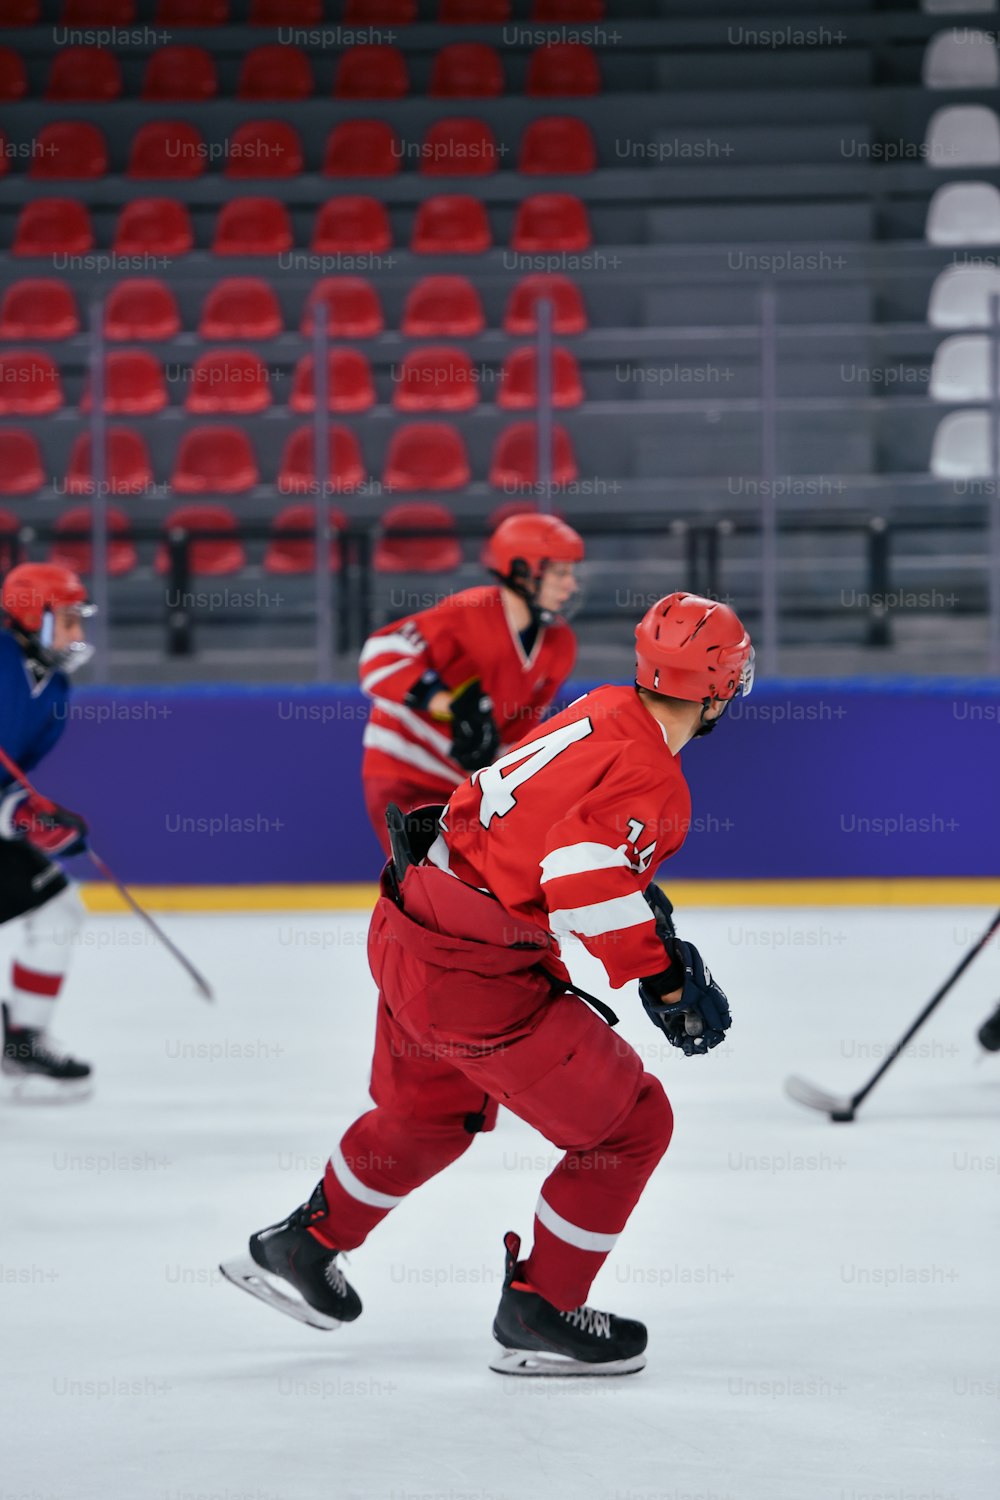 a group of young men playing a game of ice hockey